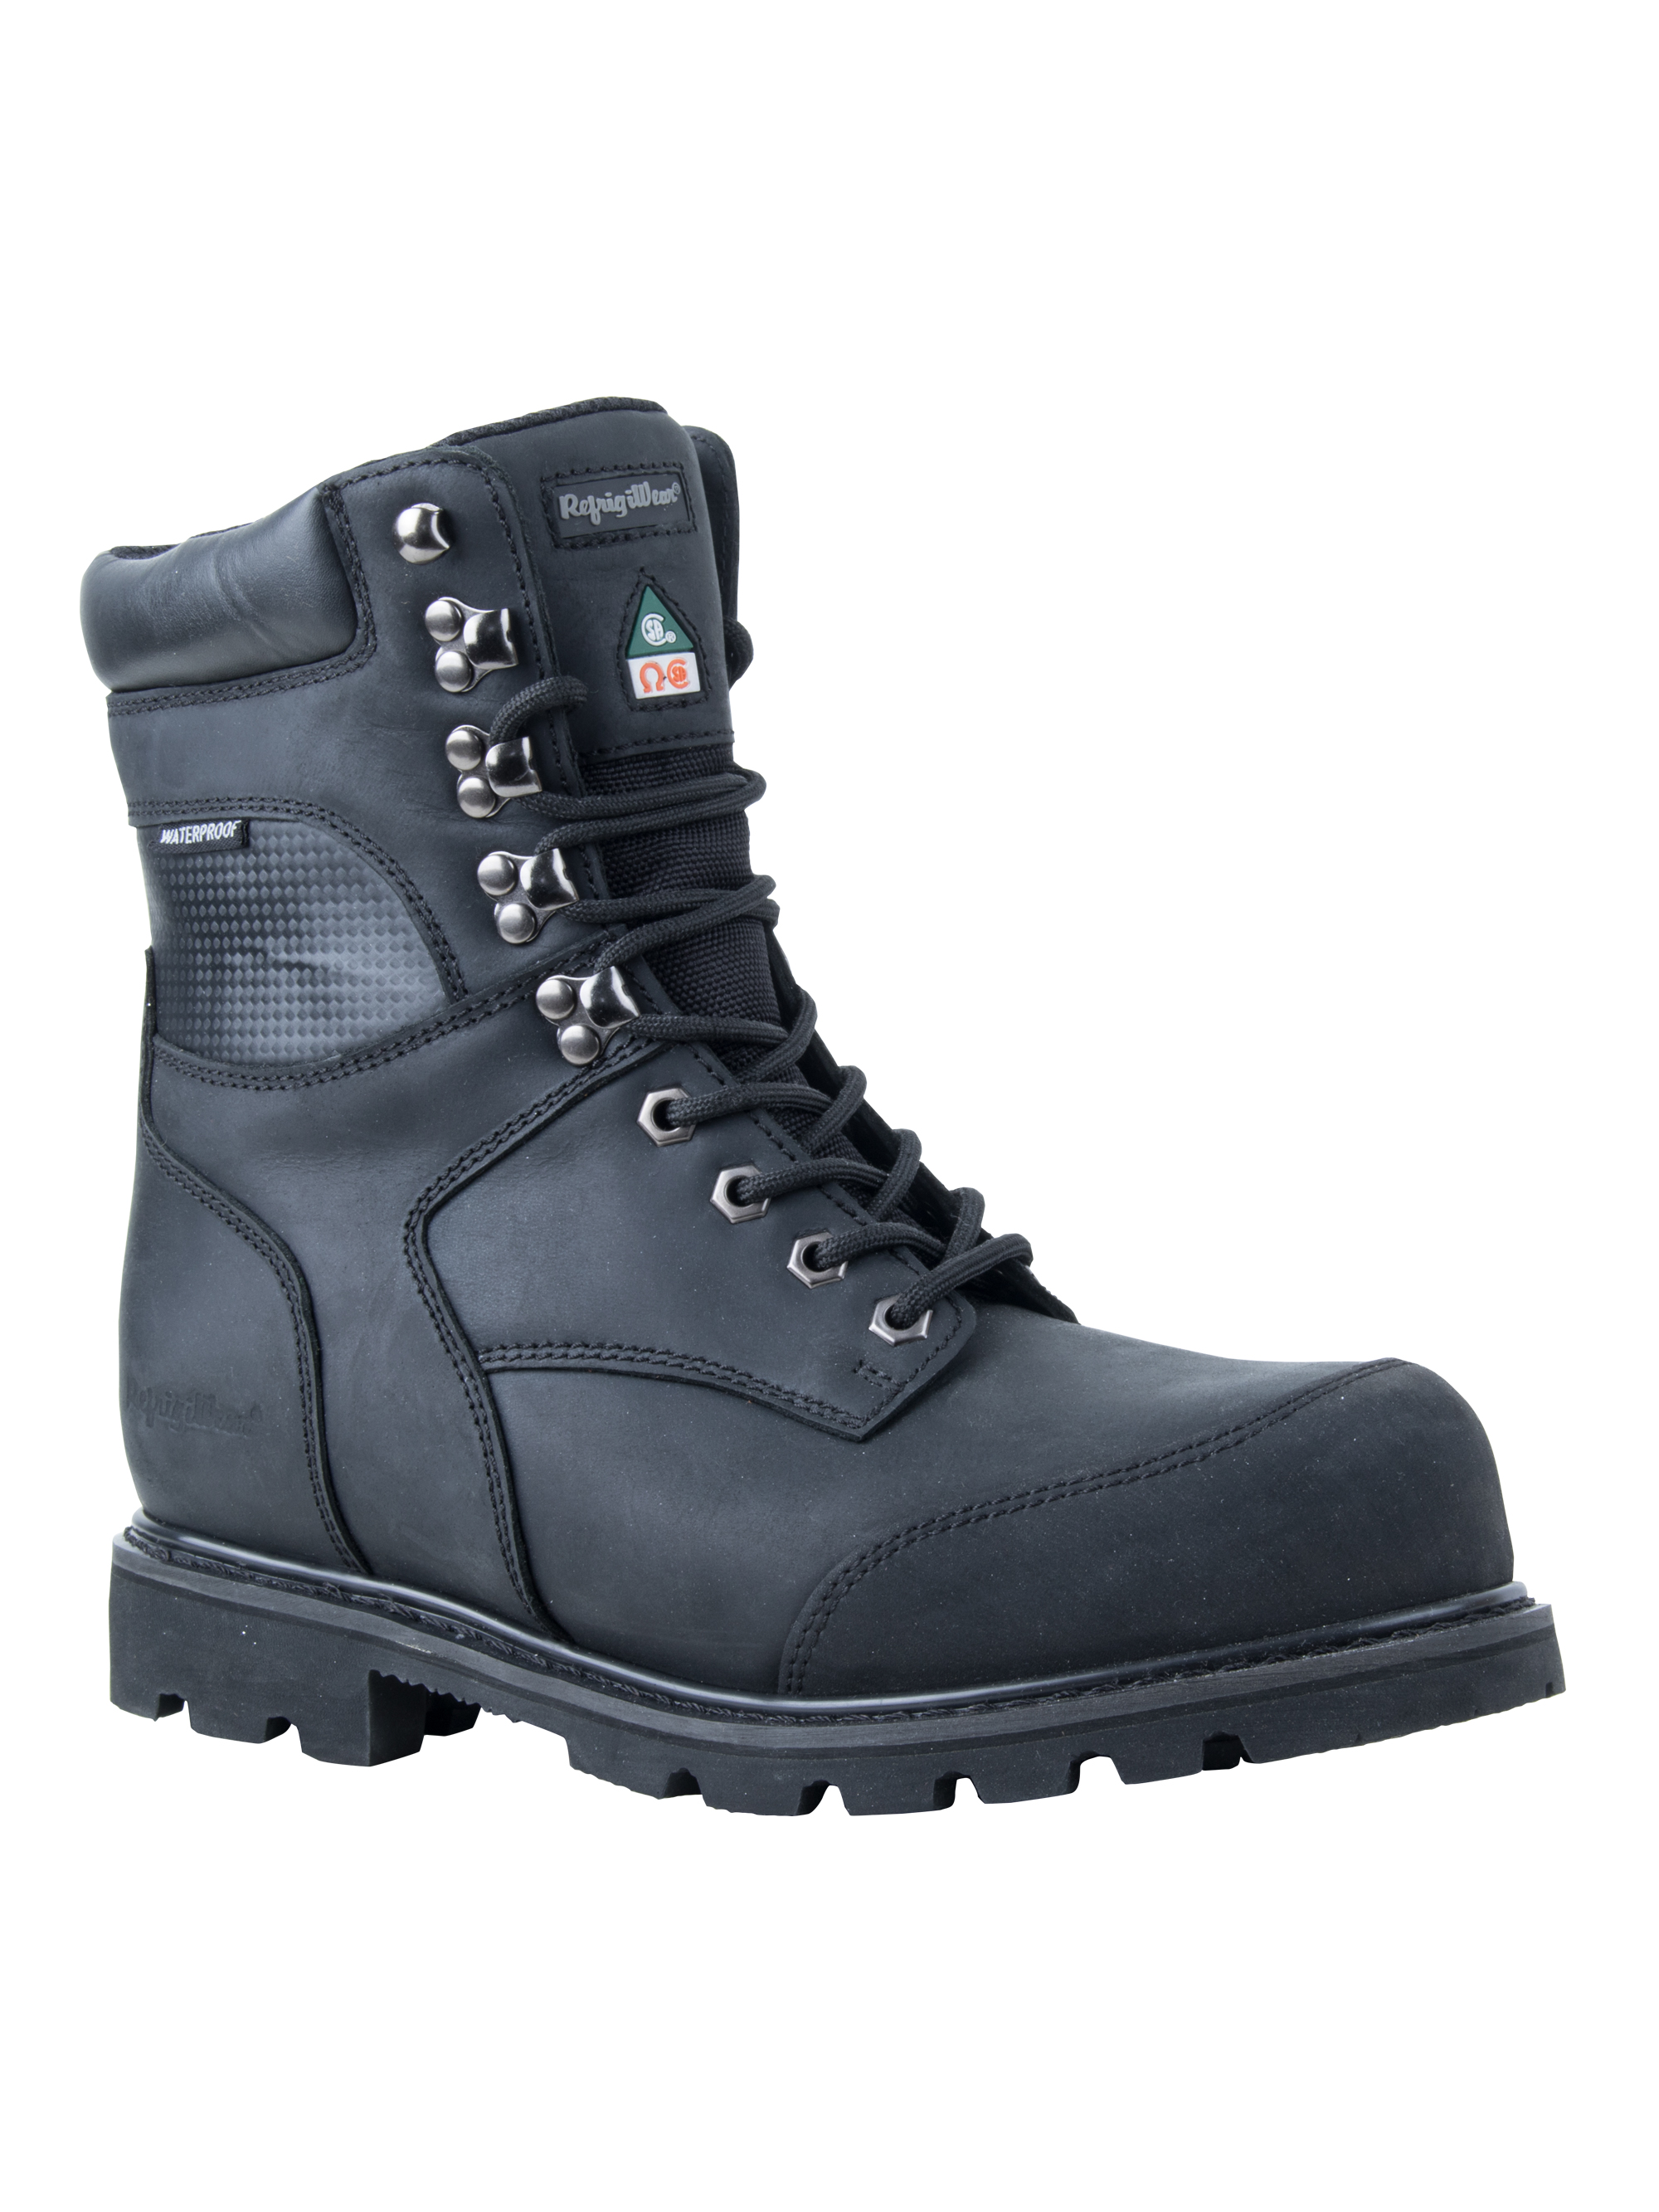 RefrigiWear Men's Platinum Leather Warm Insulated Waterproof Non-Slip Work Boots (Black, Size 11 US) - image 1 of 4